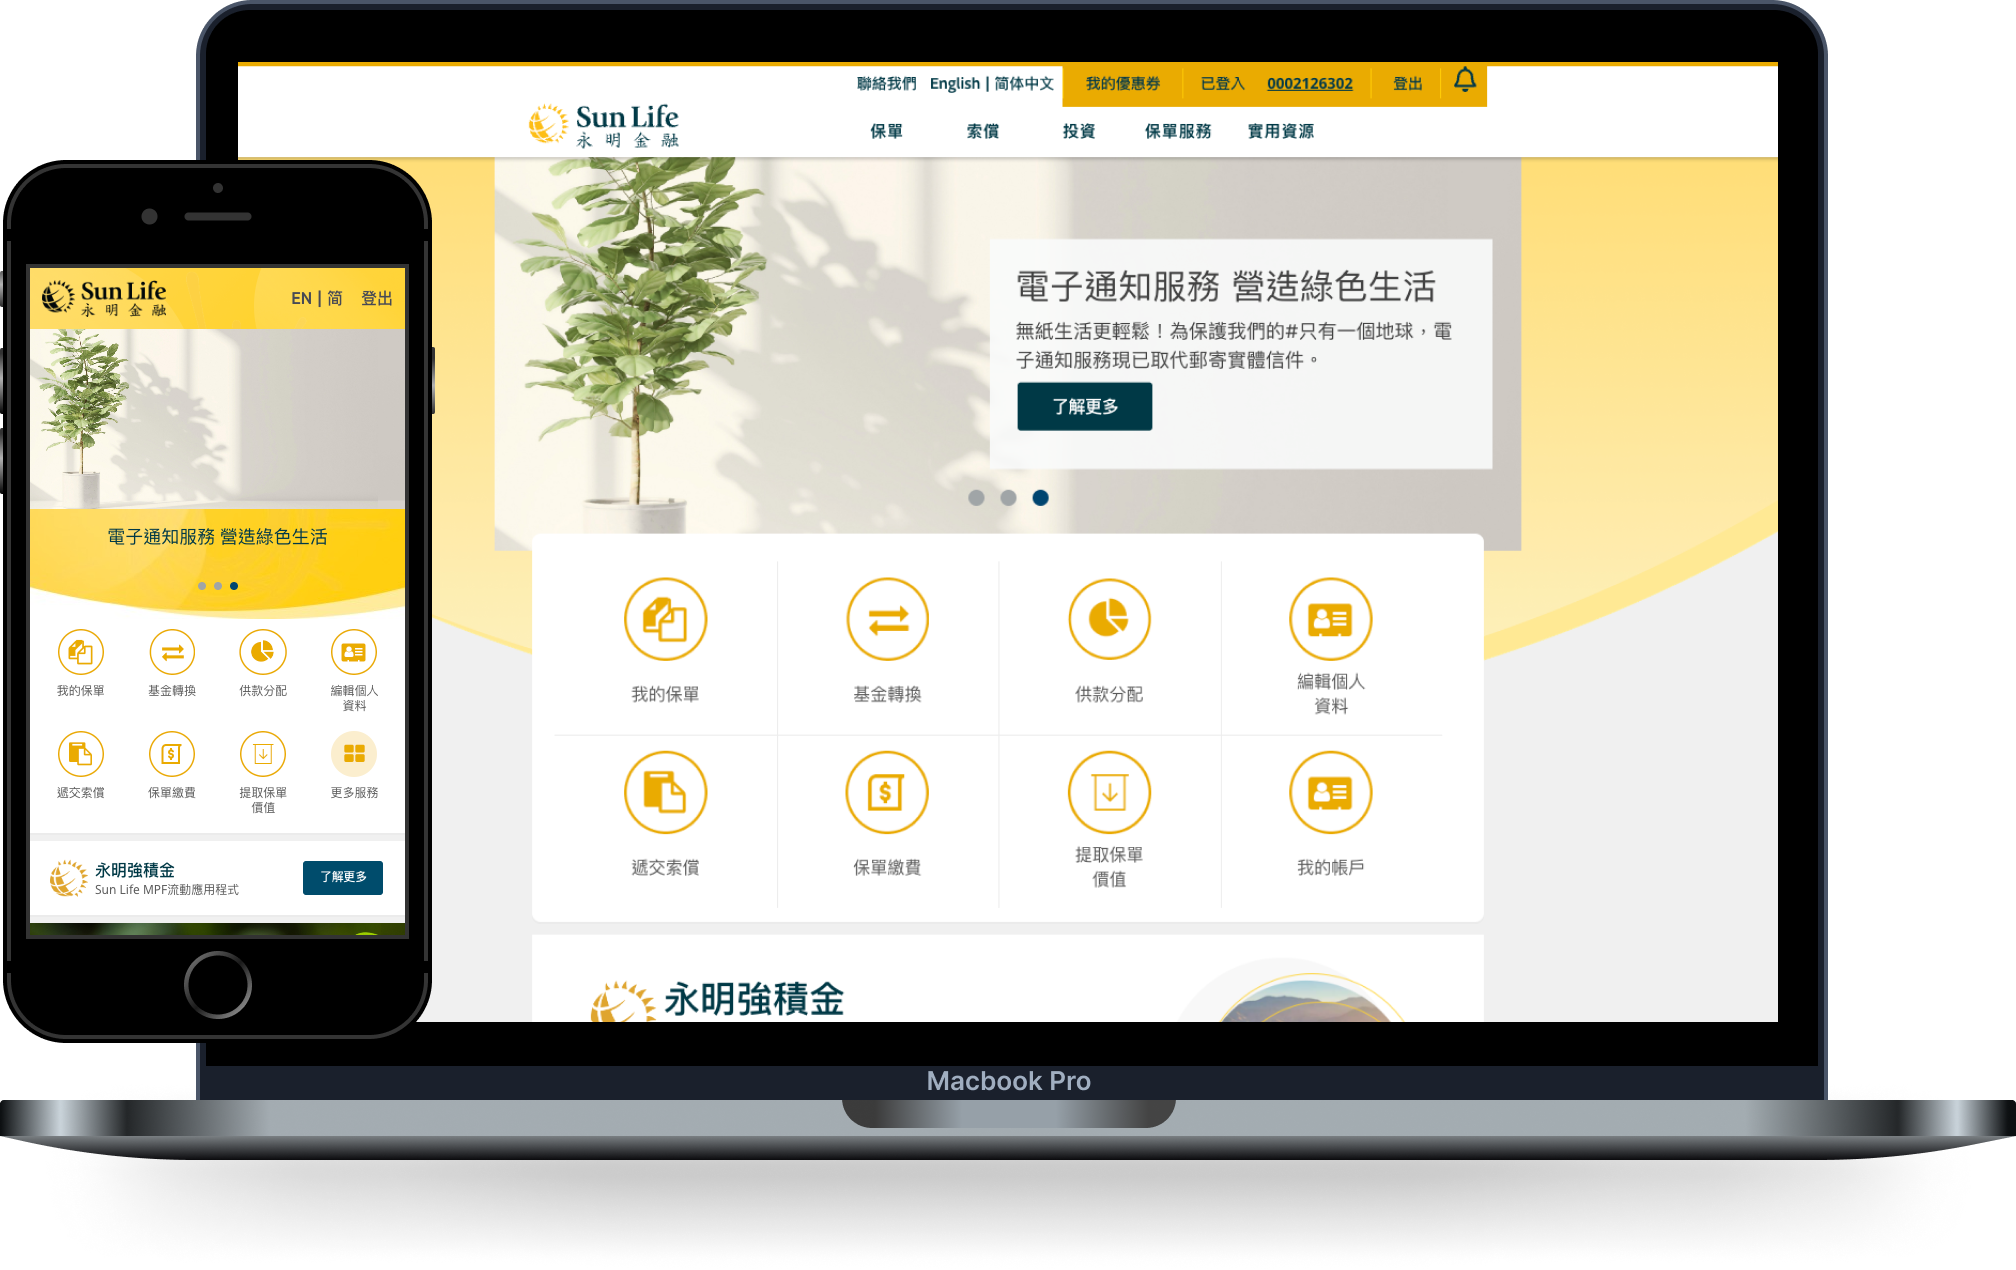 learn more about my sun life hk mobile app